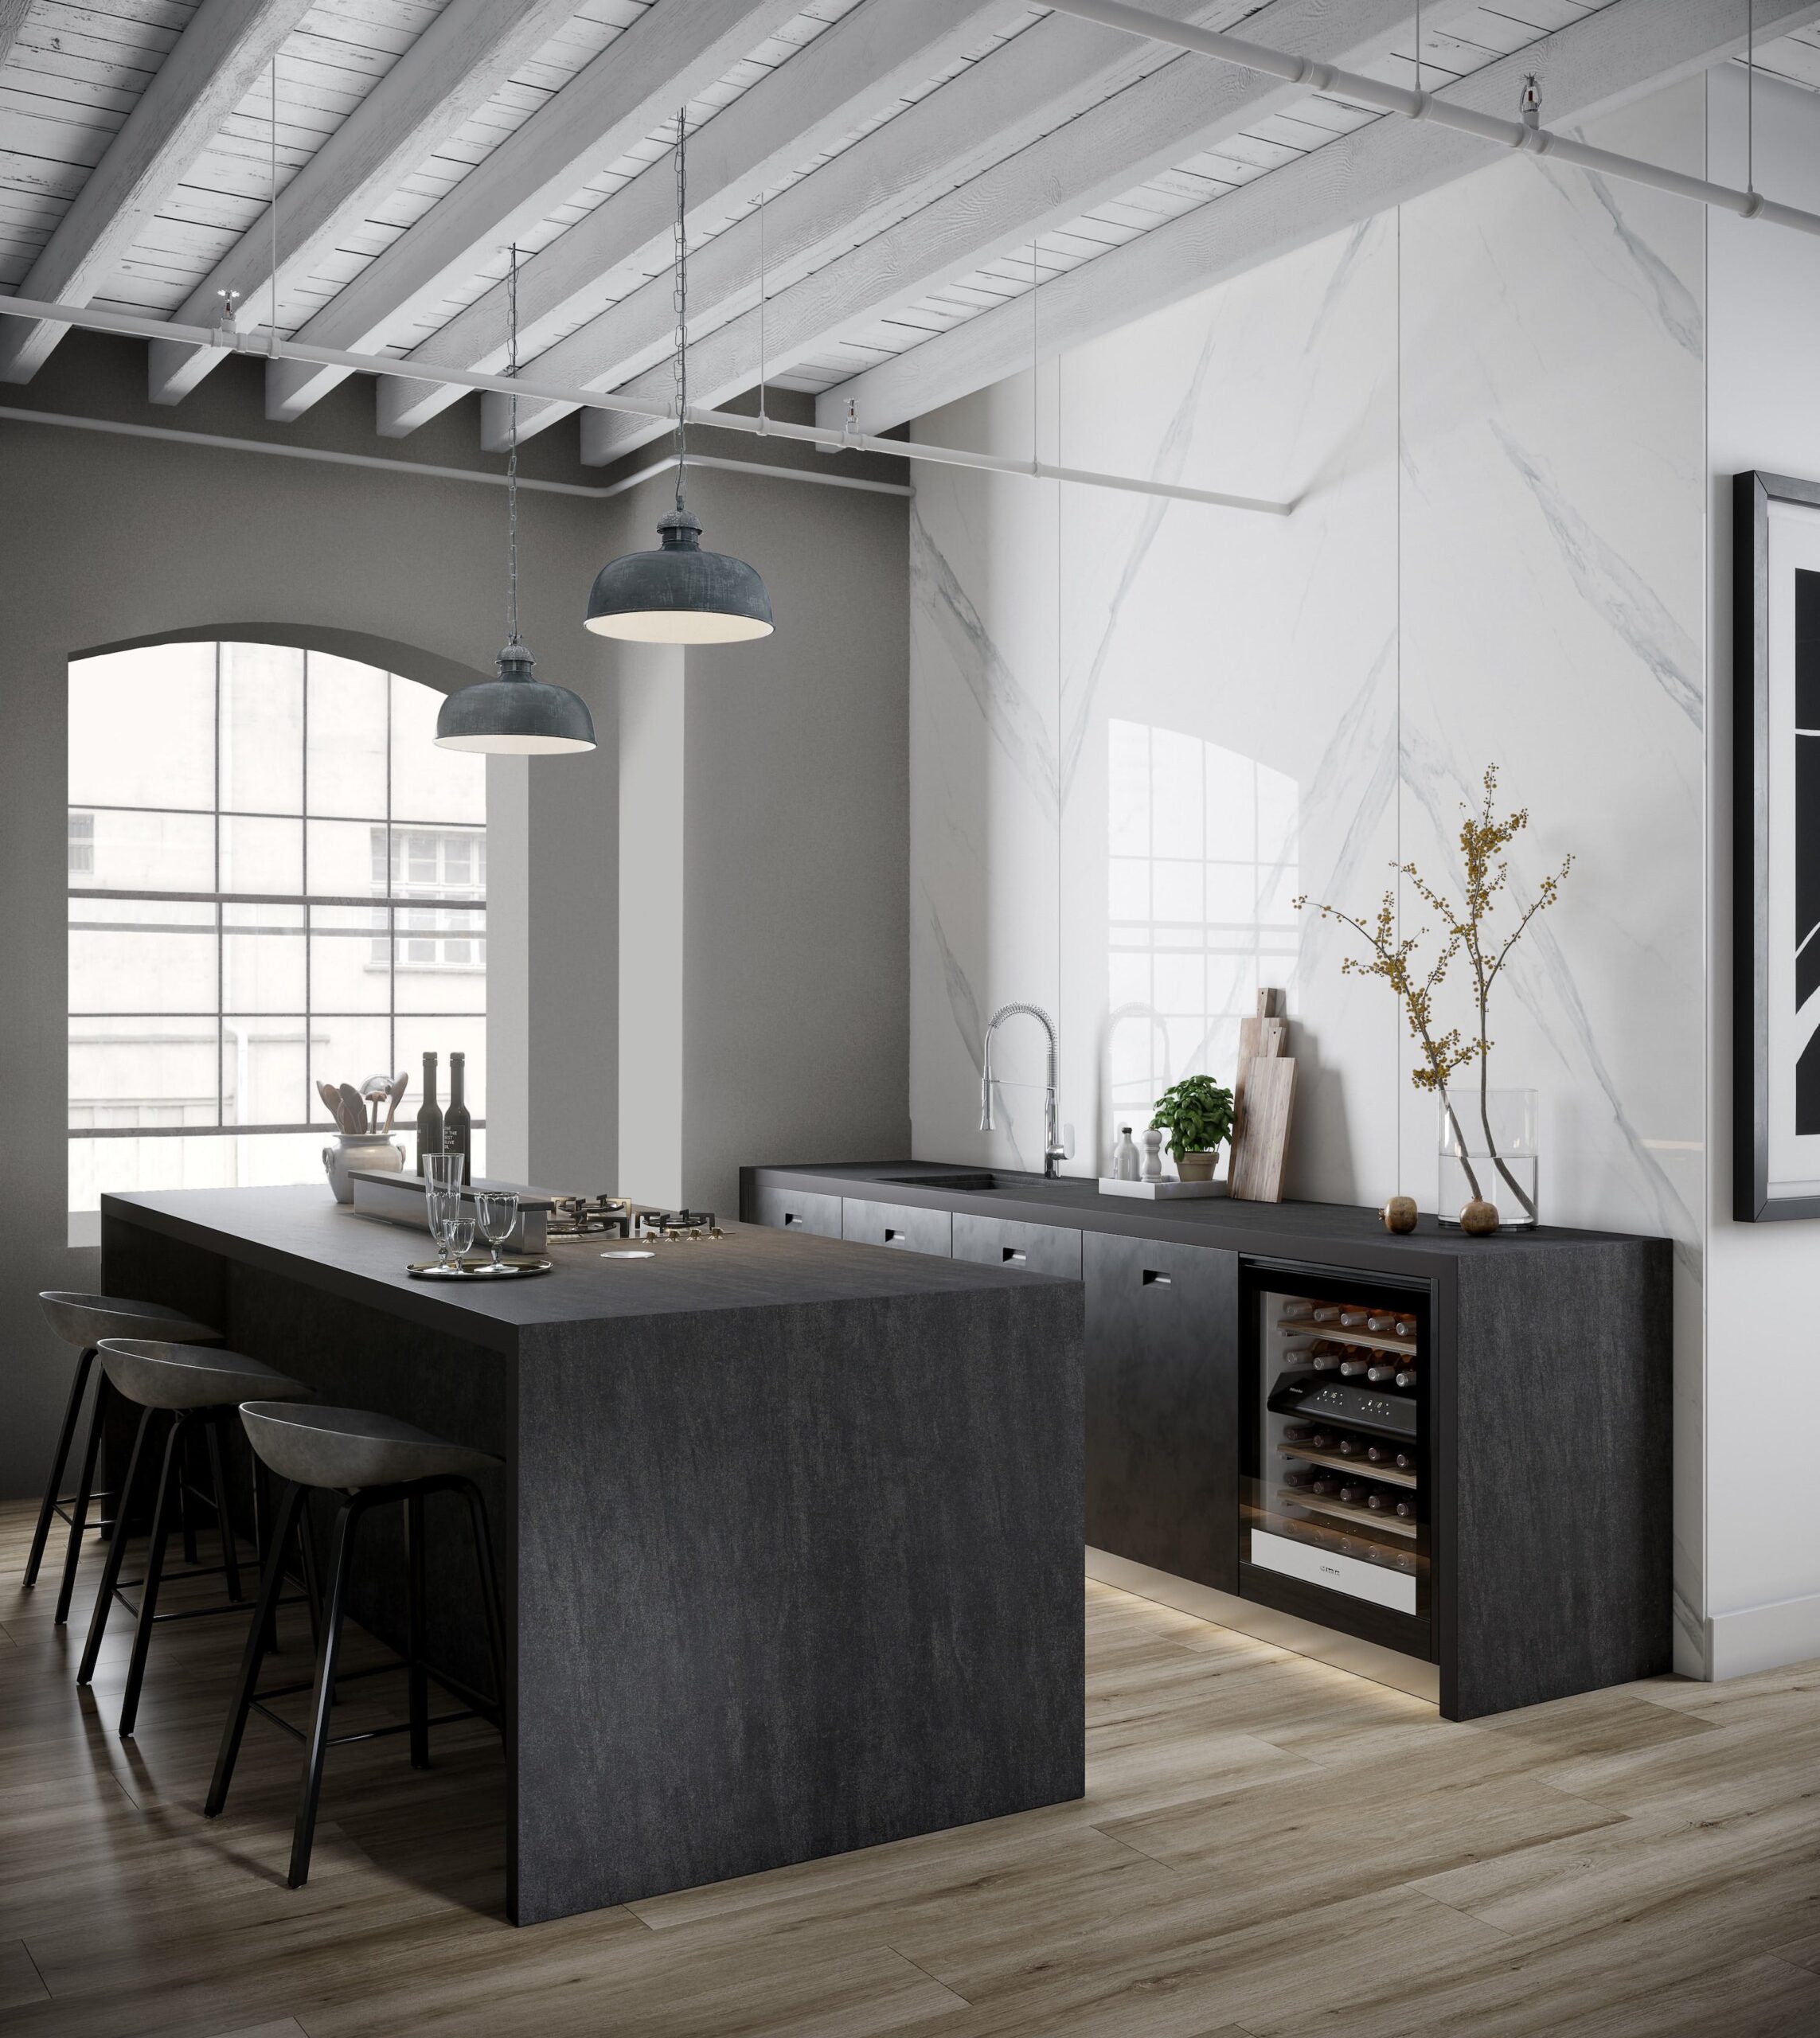 Image of Dekton Kitchen Bromo 3 2 1 scaled in The Top 7 Kitchen Makeover Trends - Cosentino